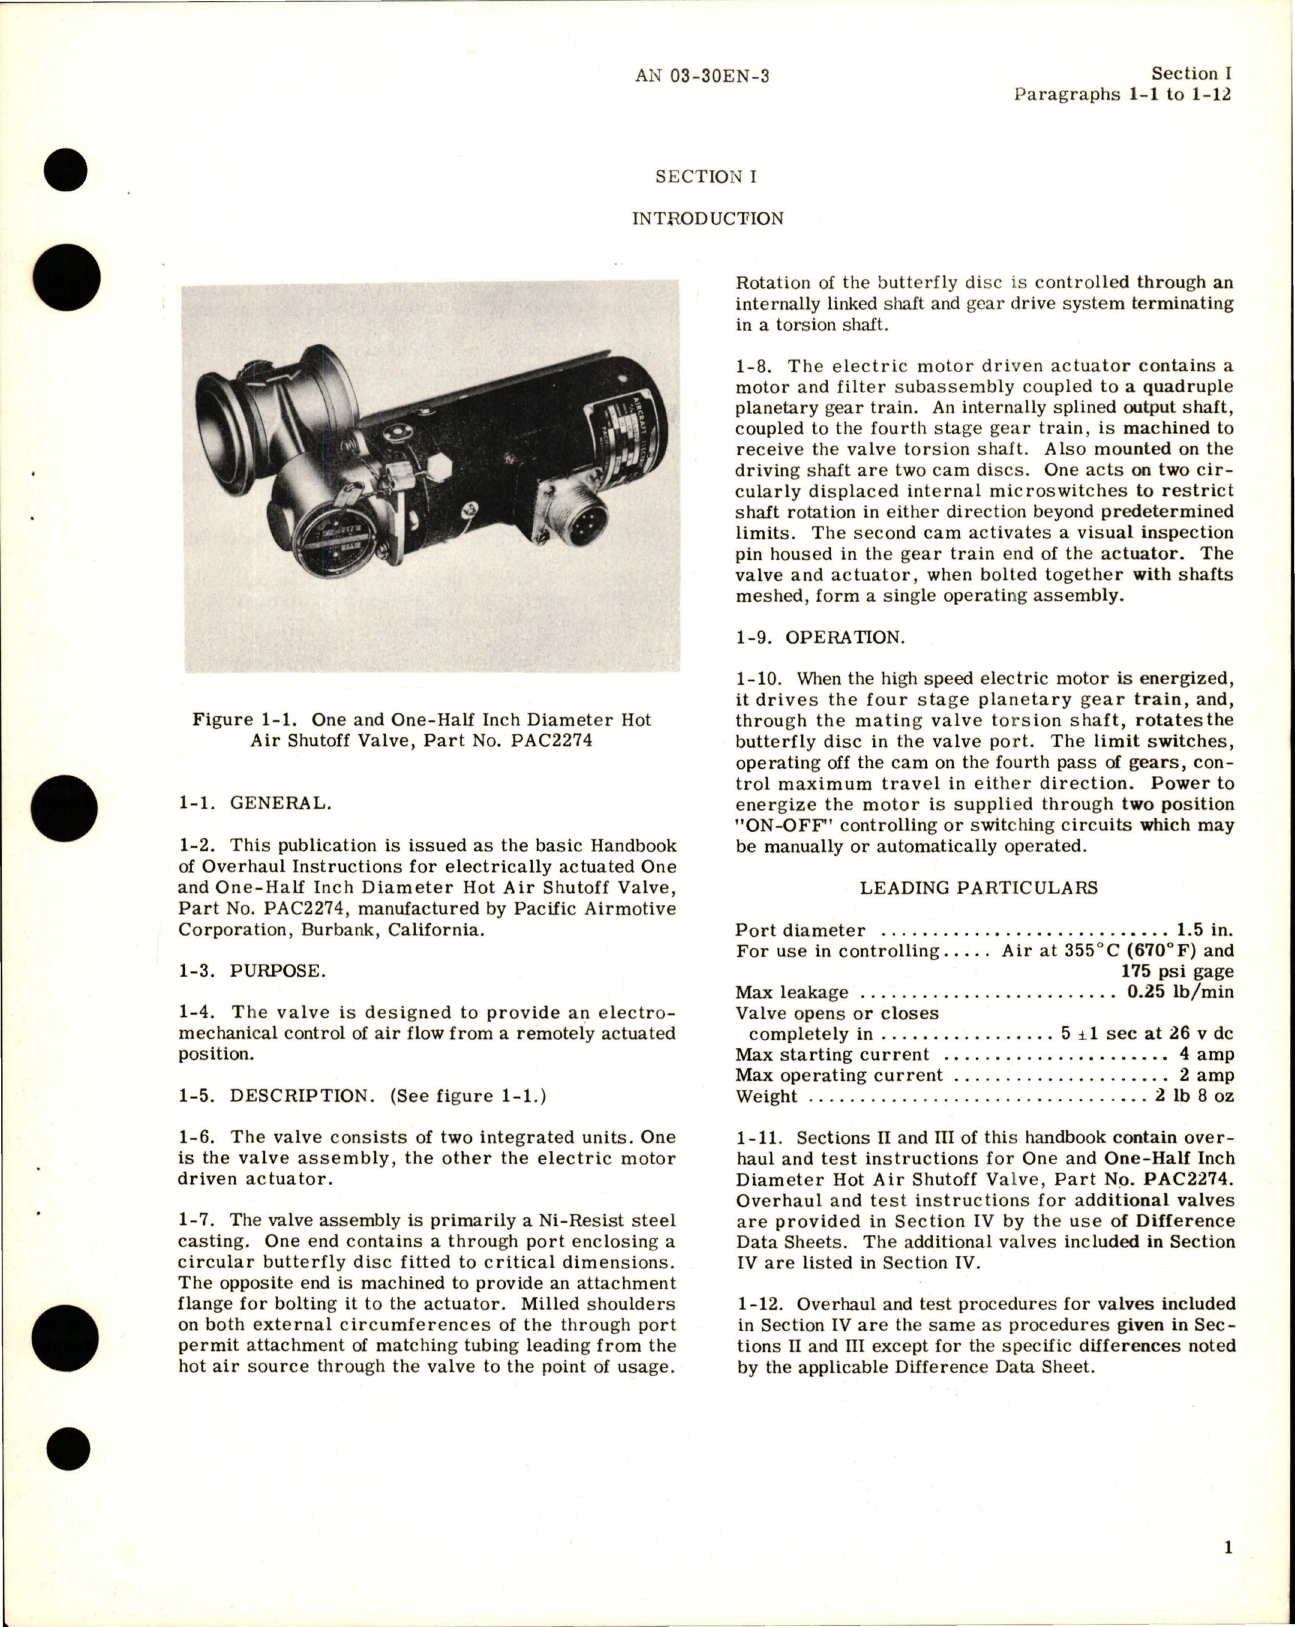 Sample page 5 from AirCorps Library document: Overhaul Instructions for Hot Air Shutoff Valve - Parts PAC 2274, PAC 2275, PAC 2279, PAC 2279-1, and PAC 3022 